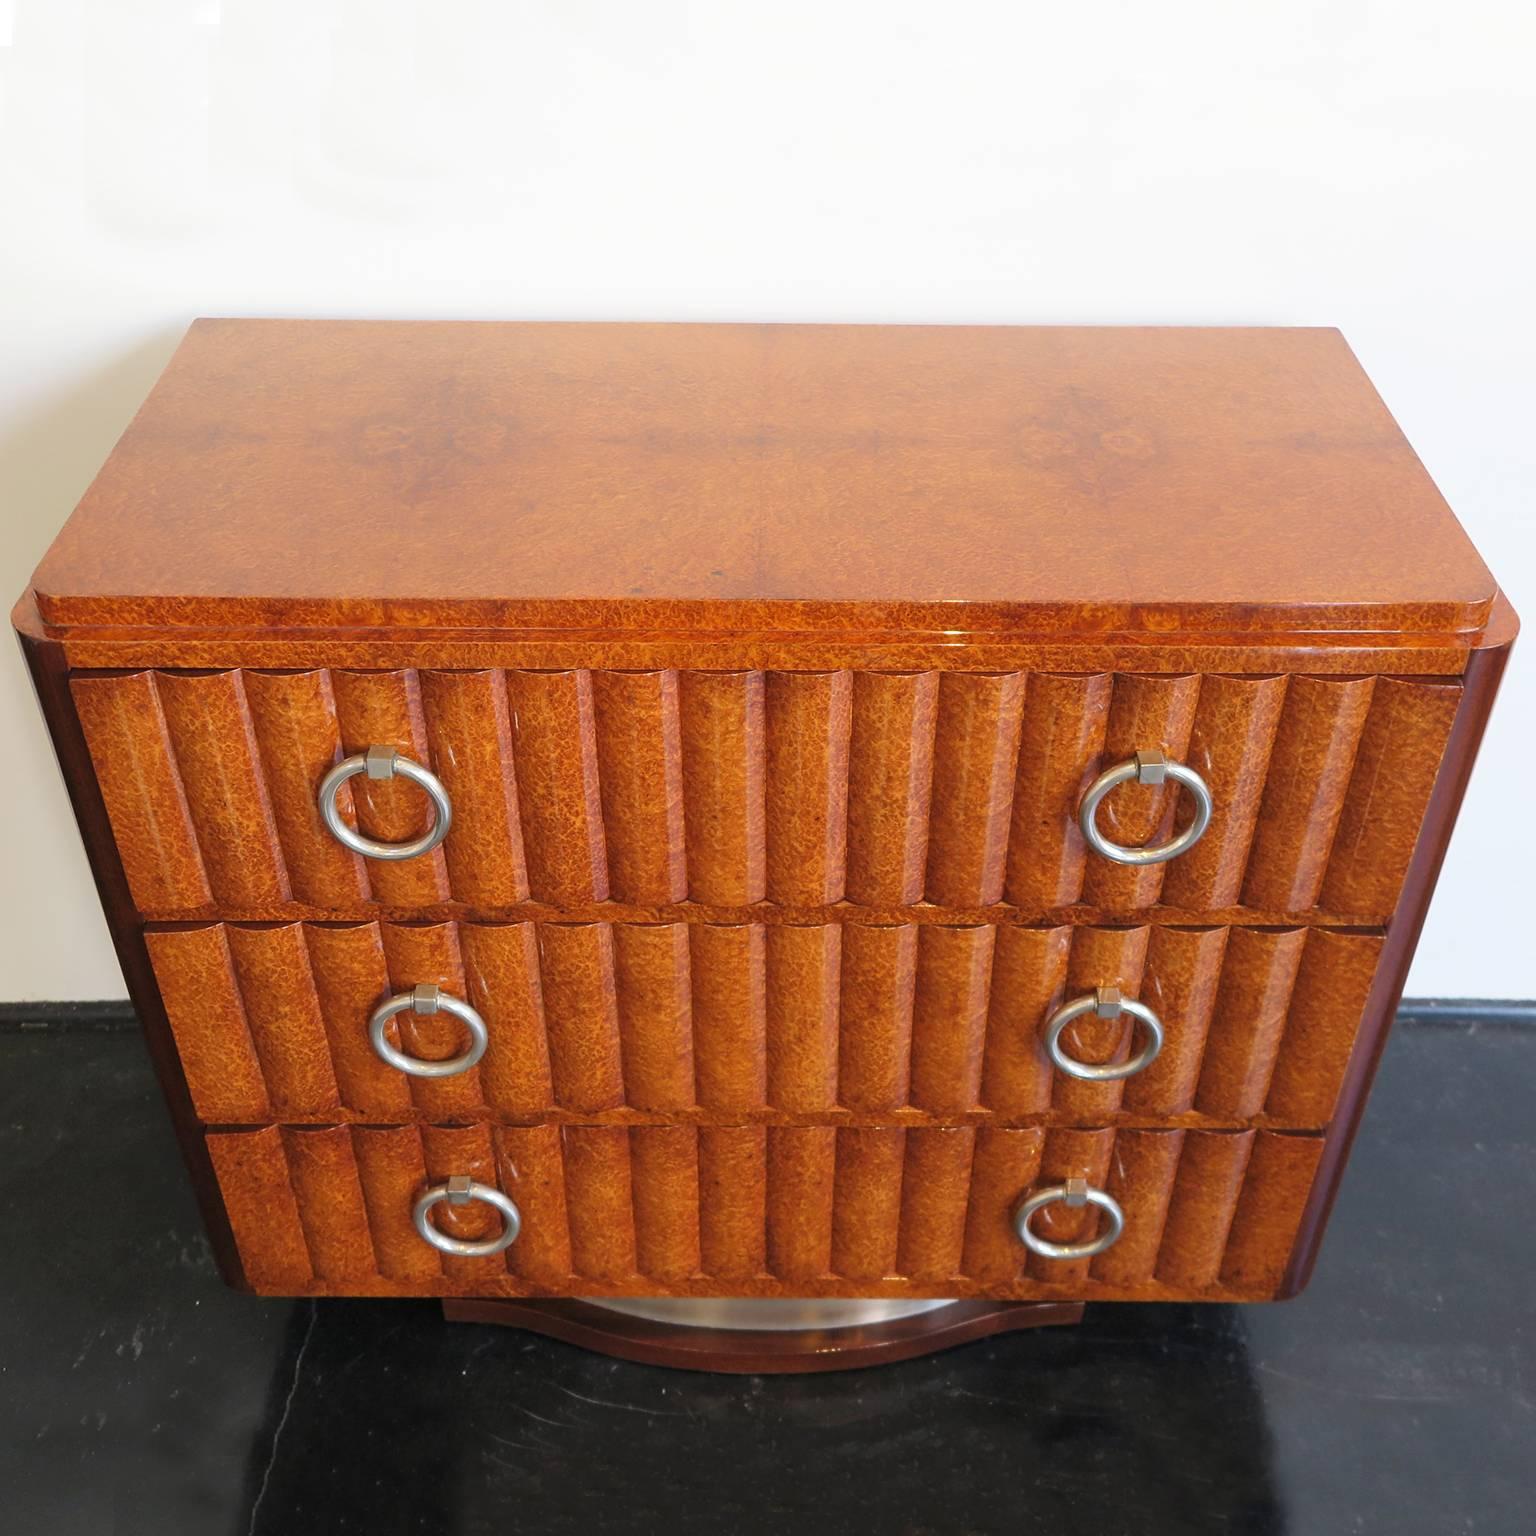 Beautiful French Art Deco dresser in exotic amboyna burl veneer with mahogany veneer on the sides. Three fluted drawers decorate the front along with six original round nickel pulls. Nickel and mahogany base.